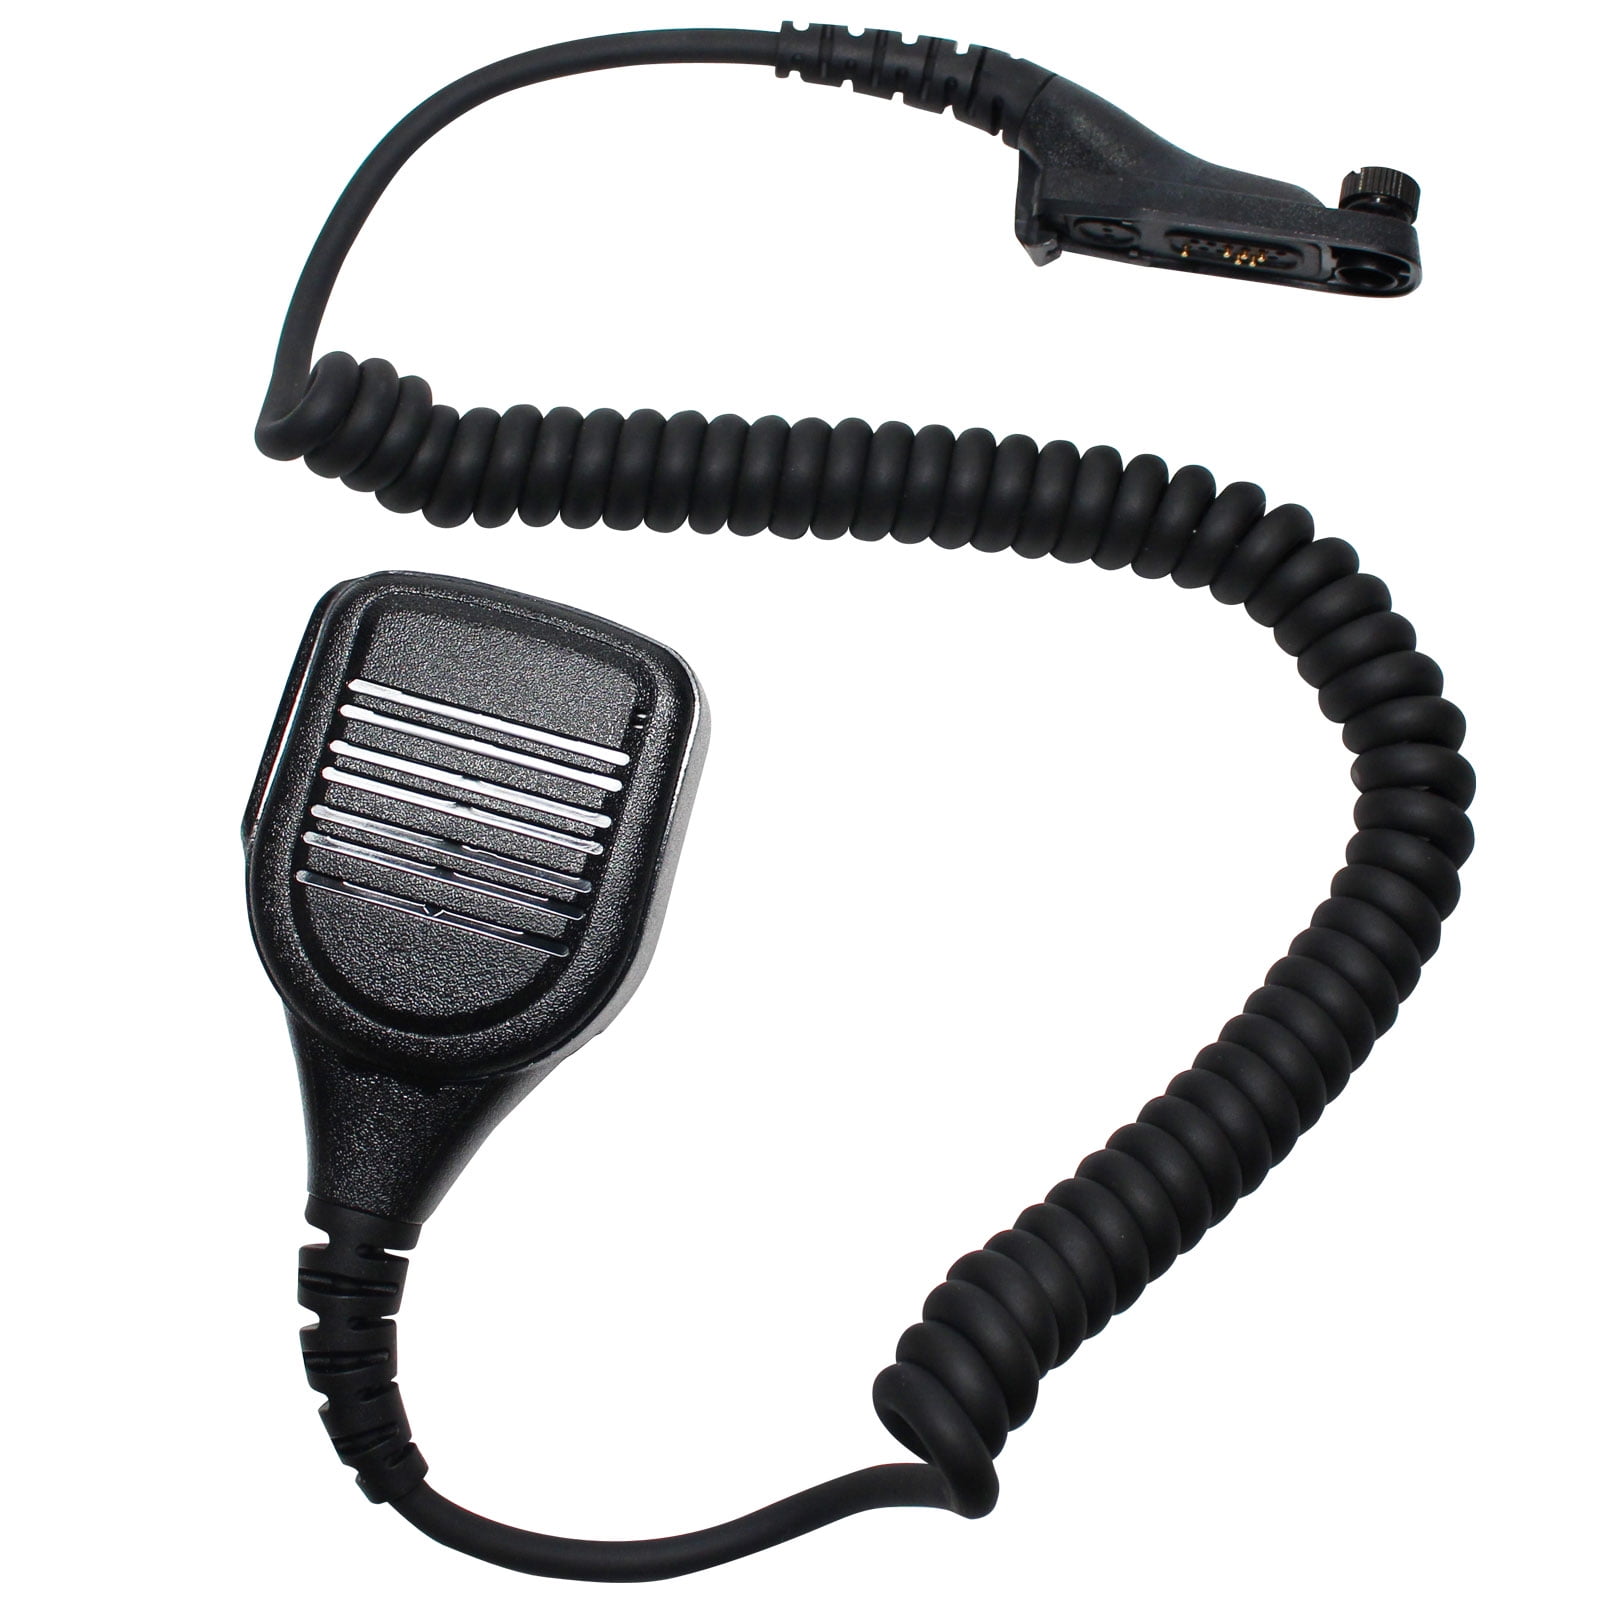 Headset for Security and Surveillance Handheld Push-to-Talk Mic Compatible with Motorola DTR550 PTT Replacement for Motorola DTR550 Two-Way Radio Shoulder Speaker Microphone 